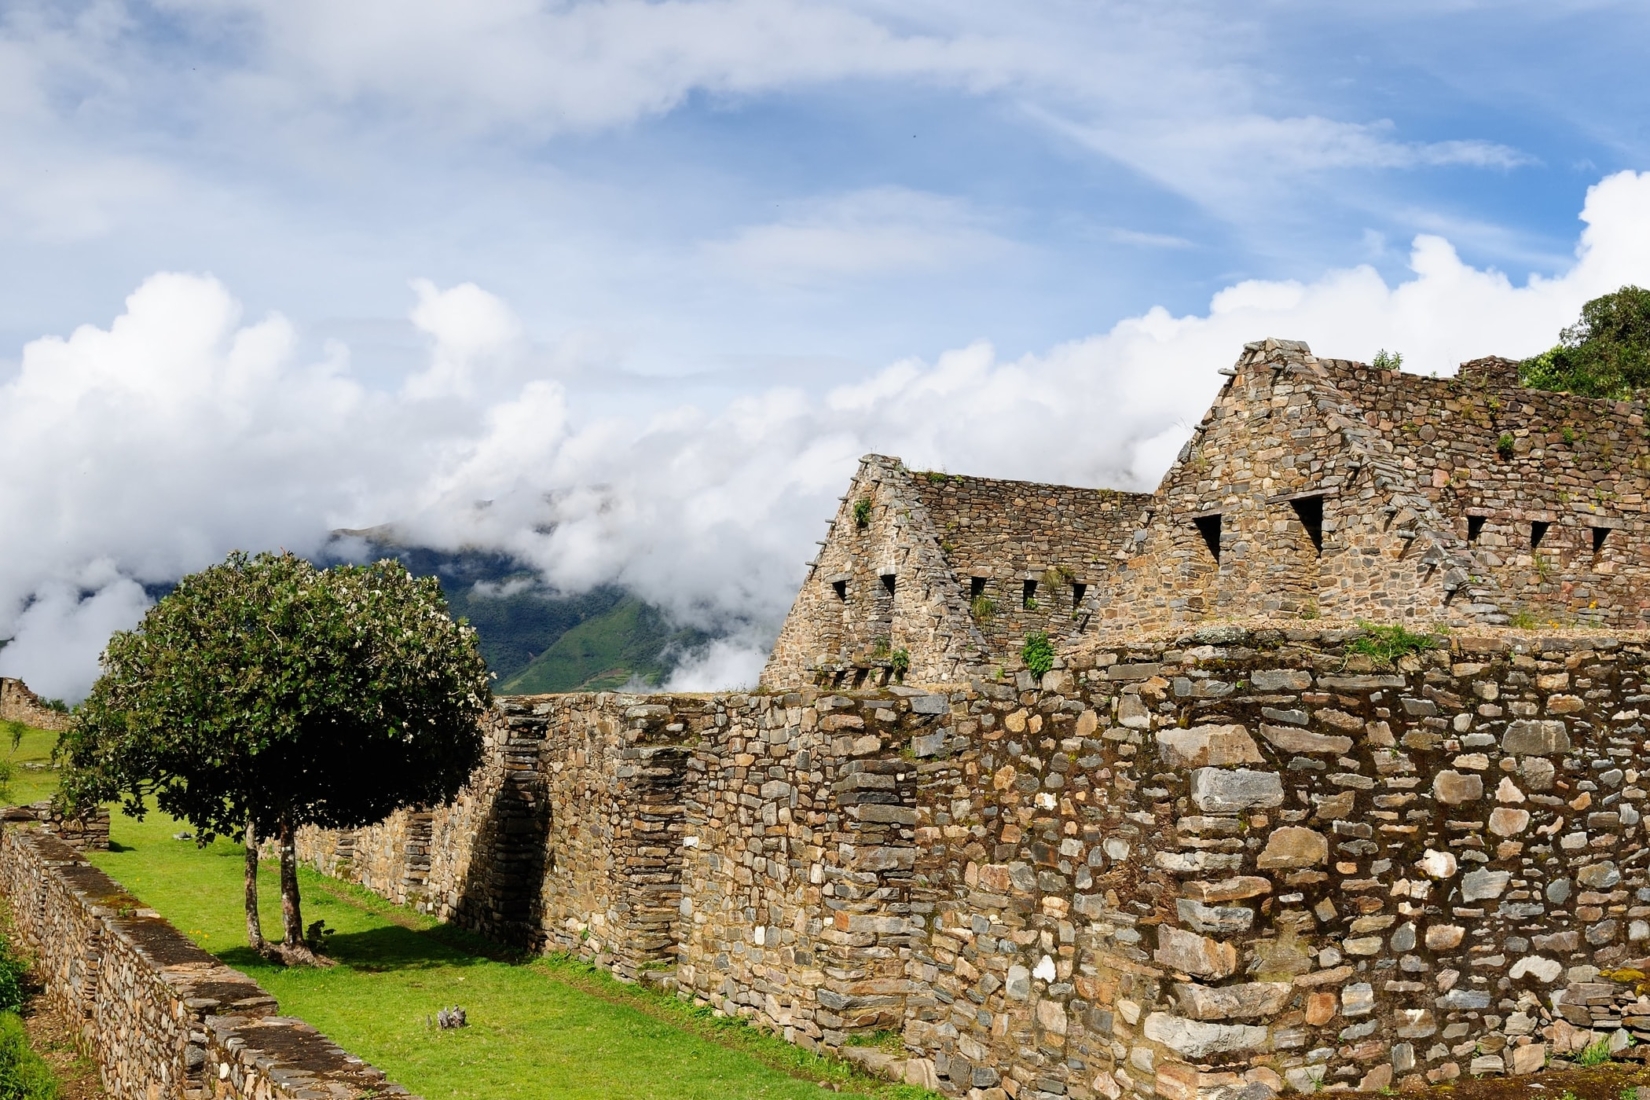 Choquequirao ancient incan stone building ruins on a grassy terrace with a pruned tree surrounded by clouds and mountains in Peru